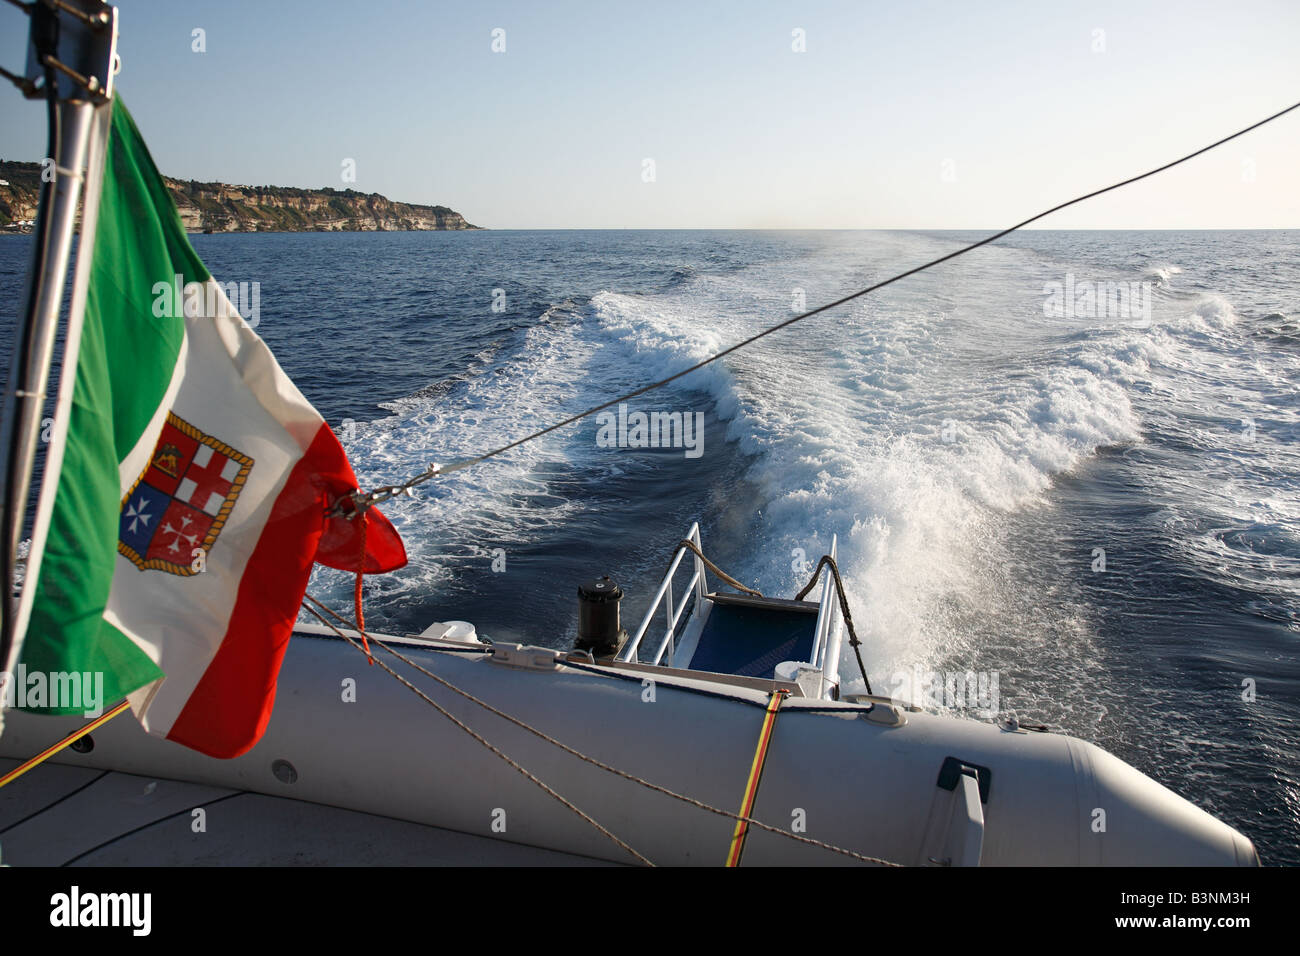 Italy, Sicily, Province of Messina, Aeolian Islands, Lipari Islands, Tyrrhenian Sea, Mediterranian Sea, excursion ship on the sea, stern, italian flagg with arms of the merchant navy, coat of arms, maritime flagg, gangway, water, waves, wake, clearway Stock Photo